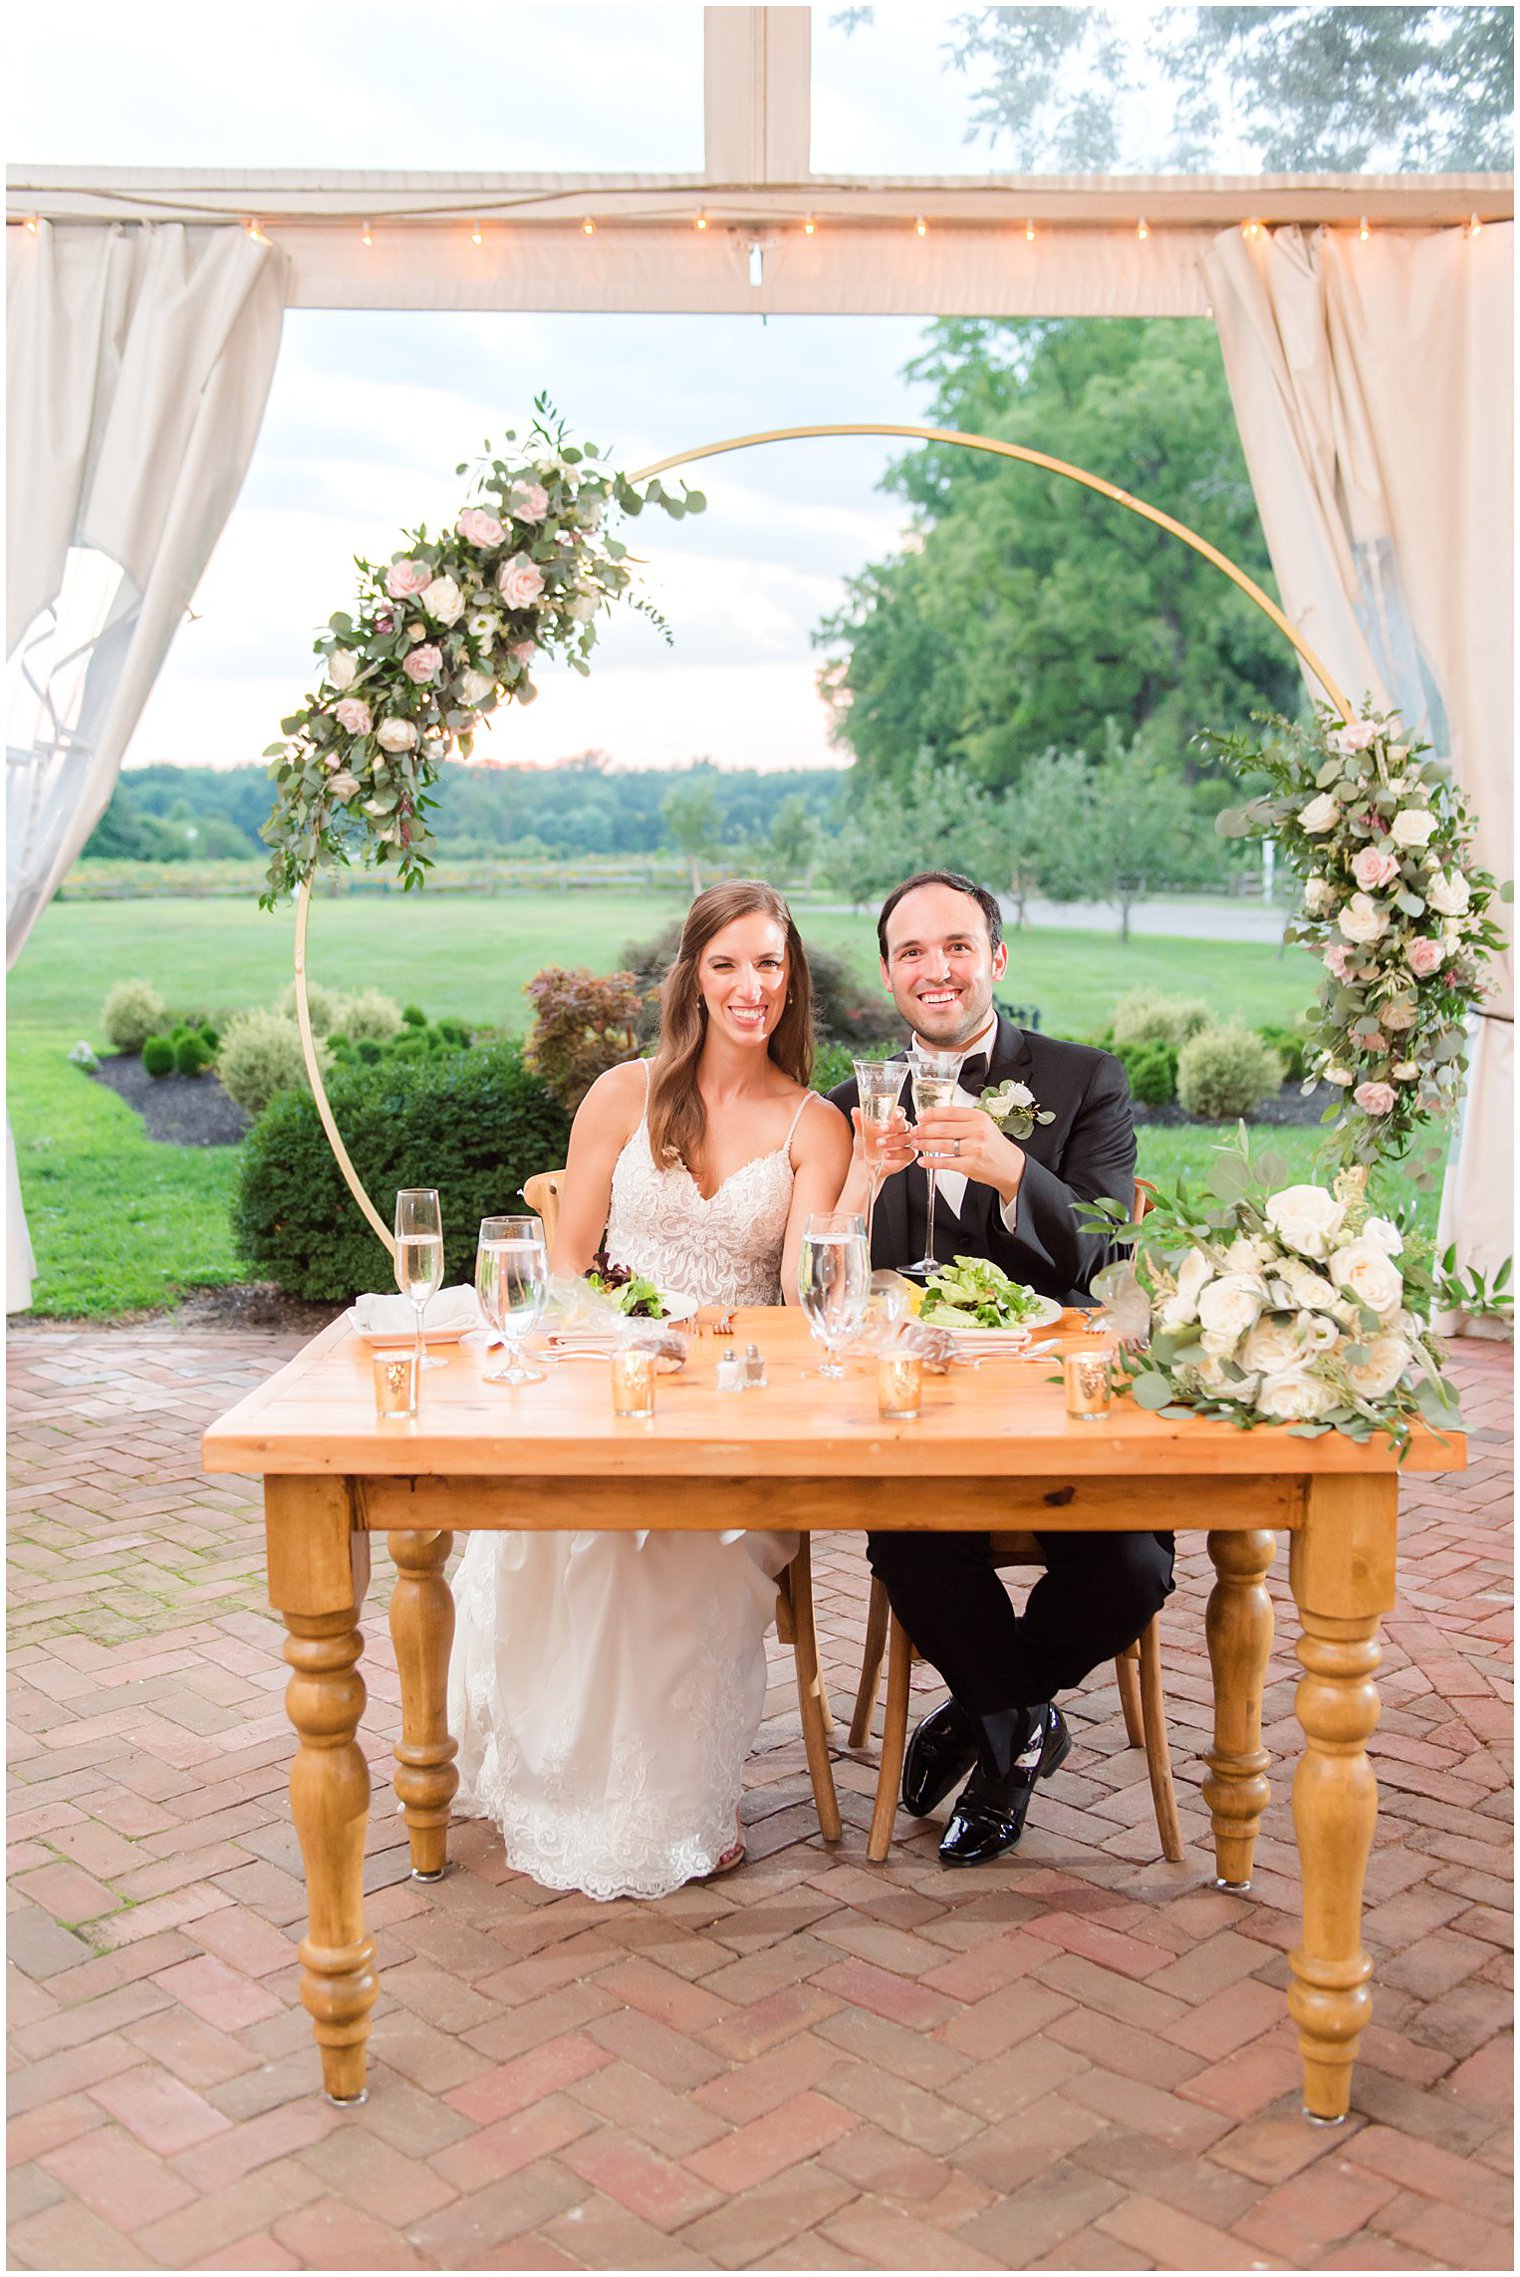 newlyweds toast champagne at sweetheart table during Chesterfield NJ wedding reception